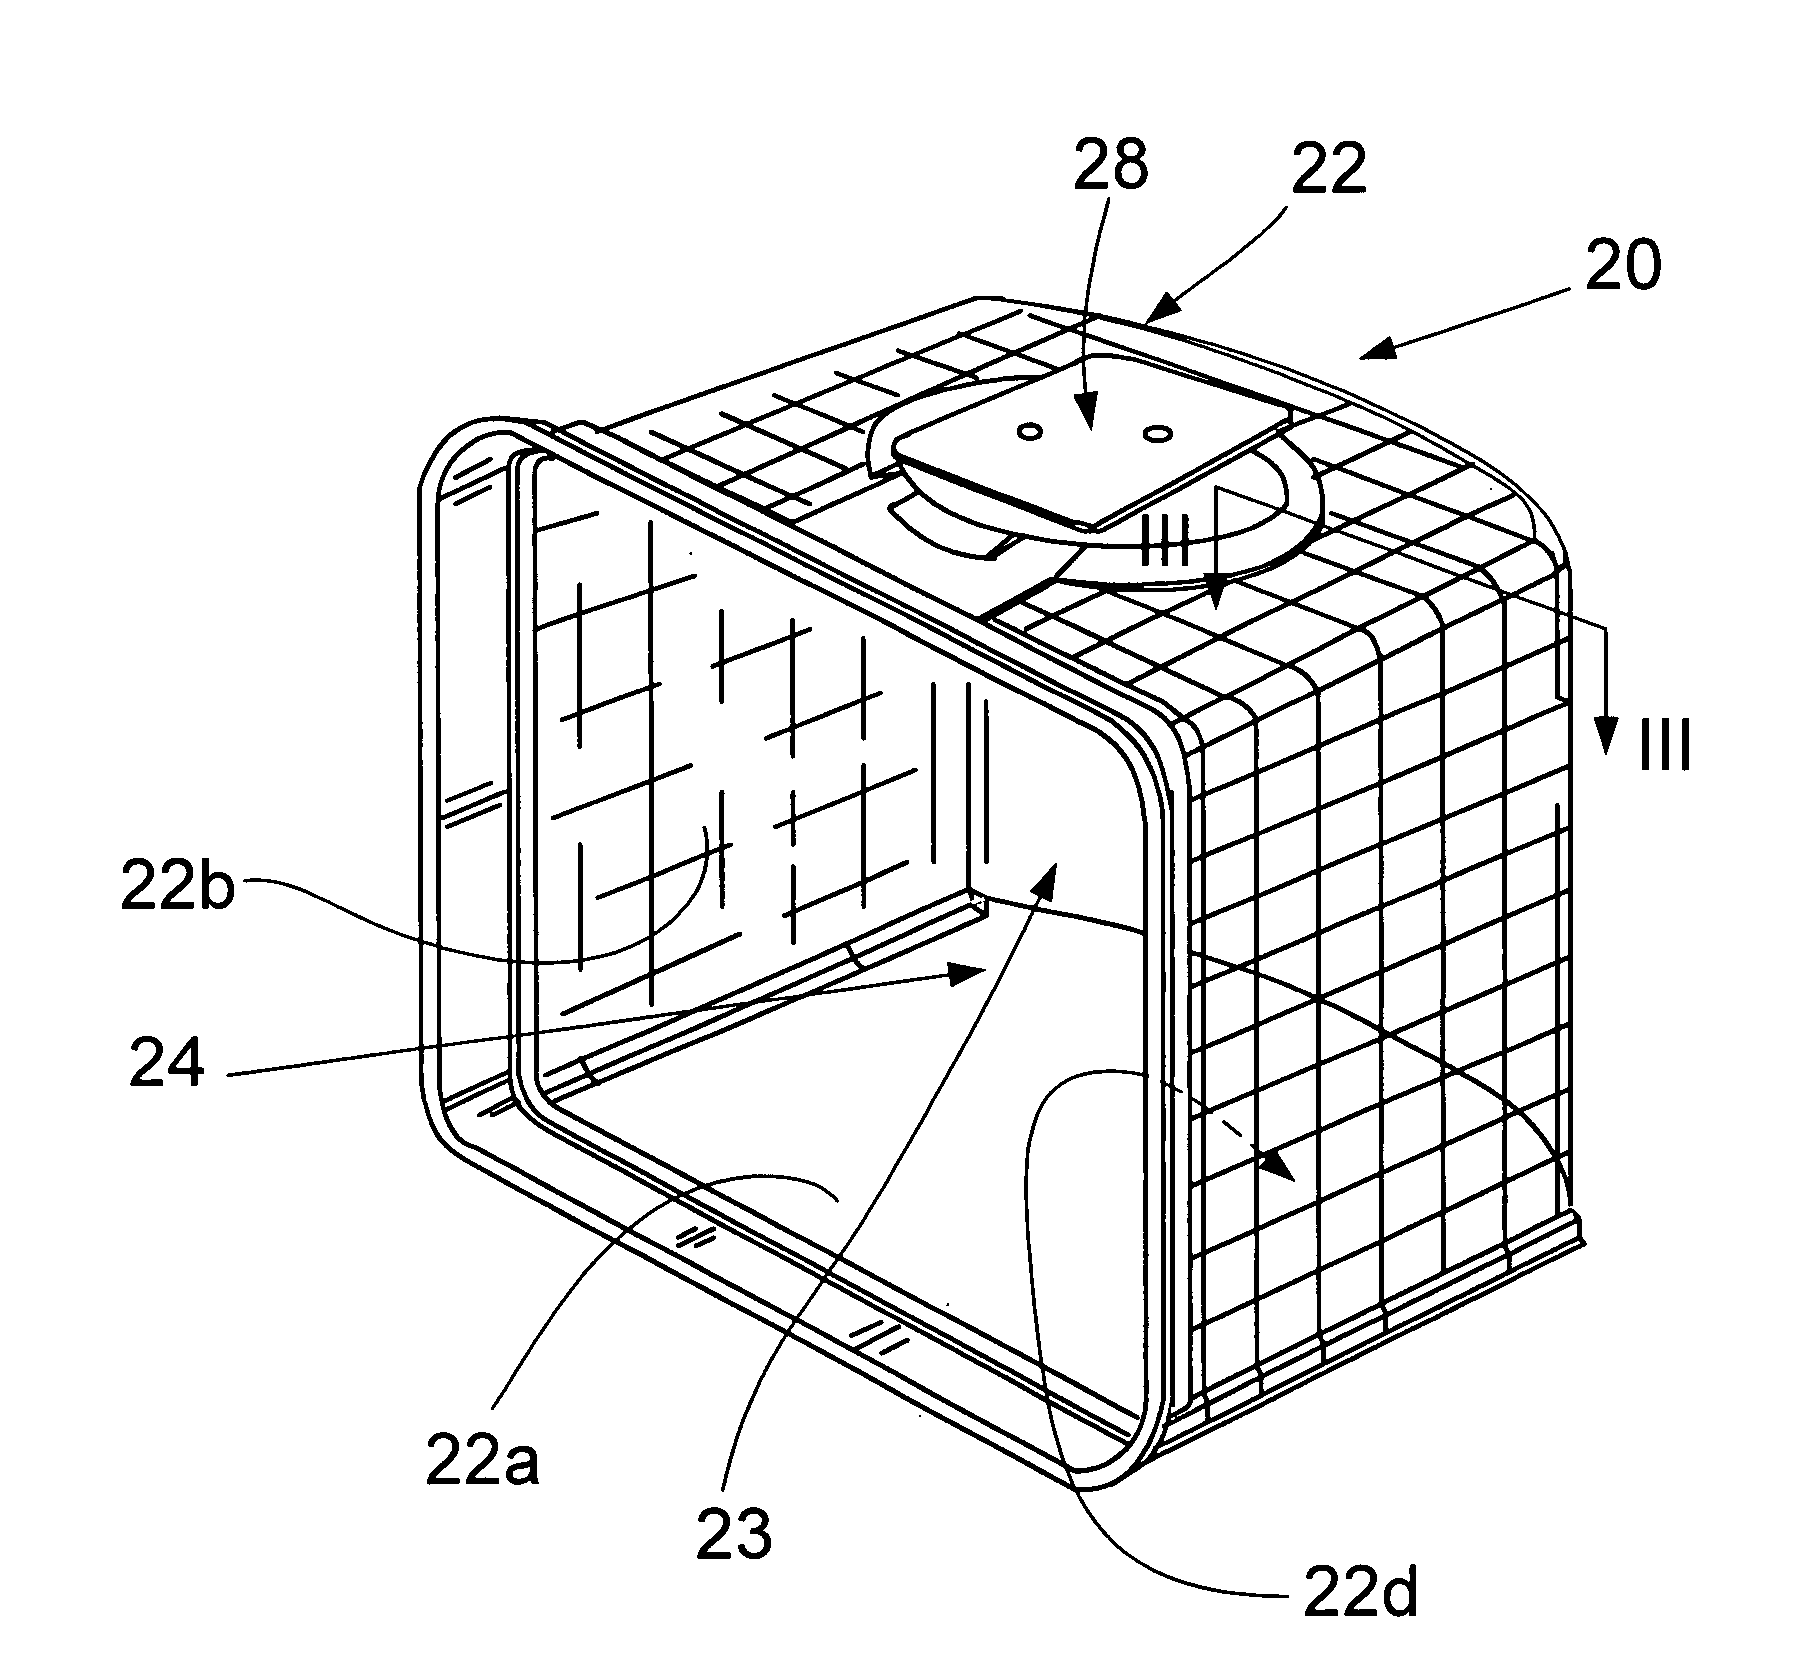 Apparatus and method for application of a thin barrier layer onto inner surfaces of wafer containers